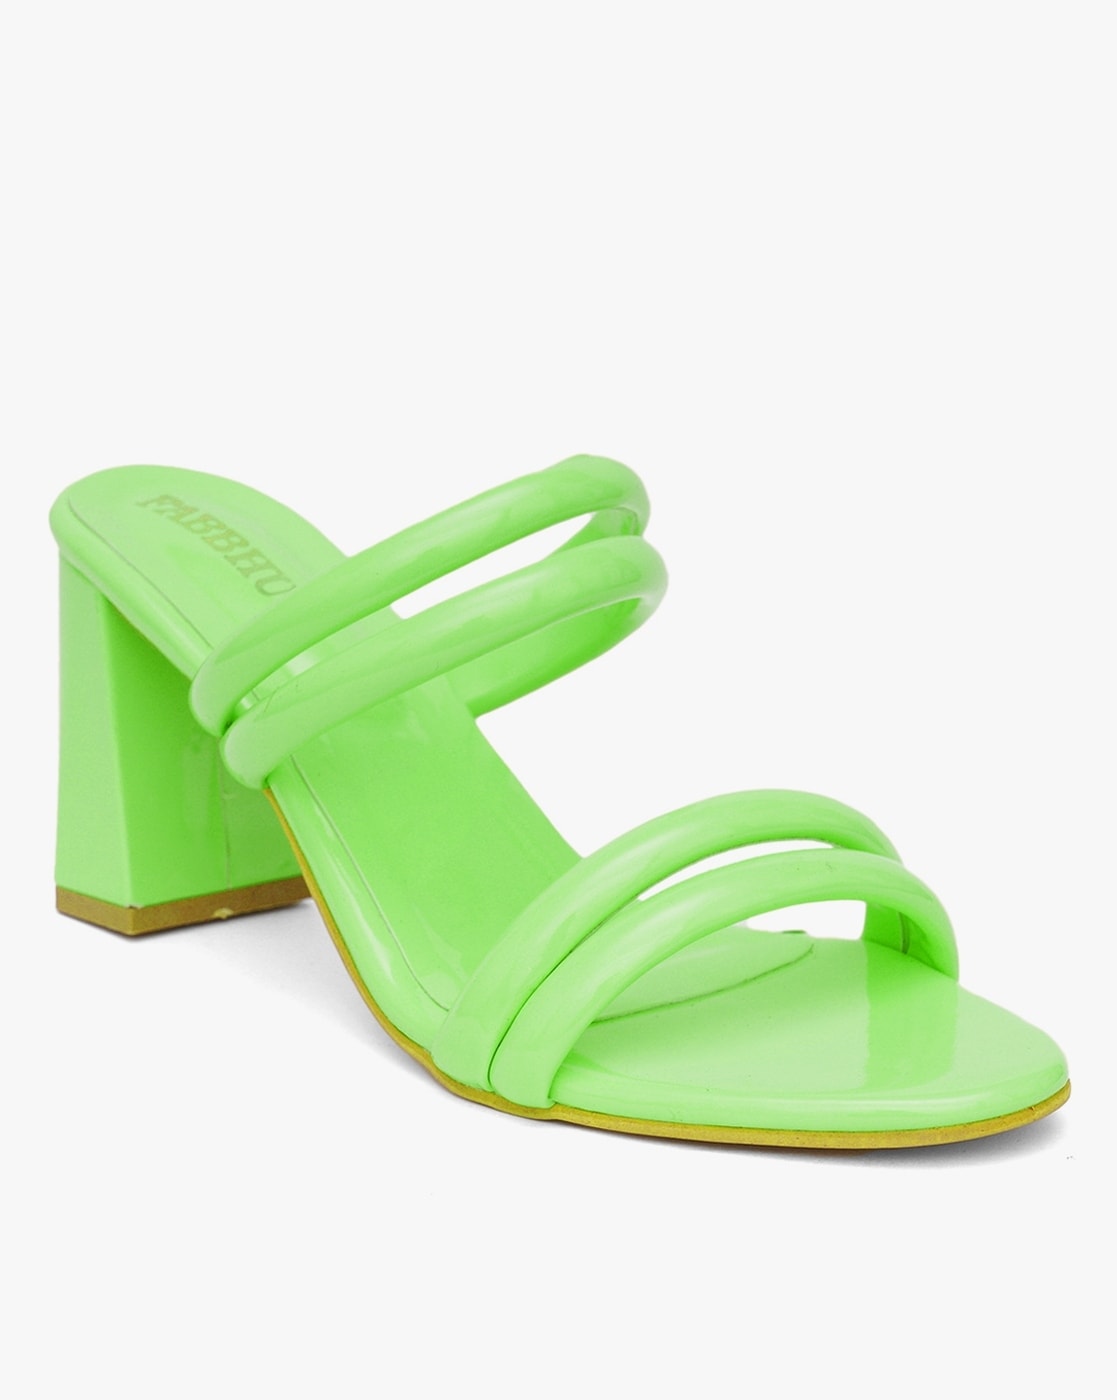 Stradivarius strappy heeled sandal with squared toe in lime green | ASOS